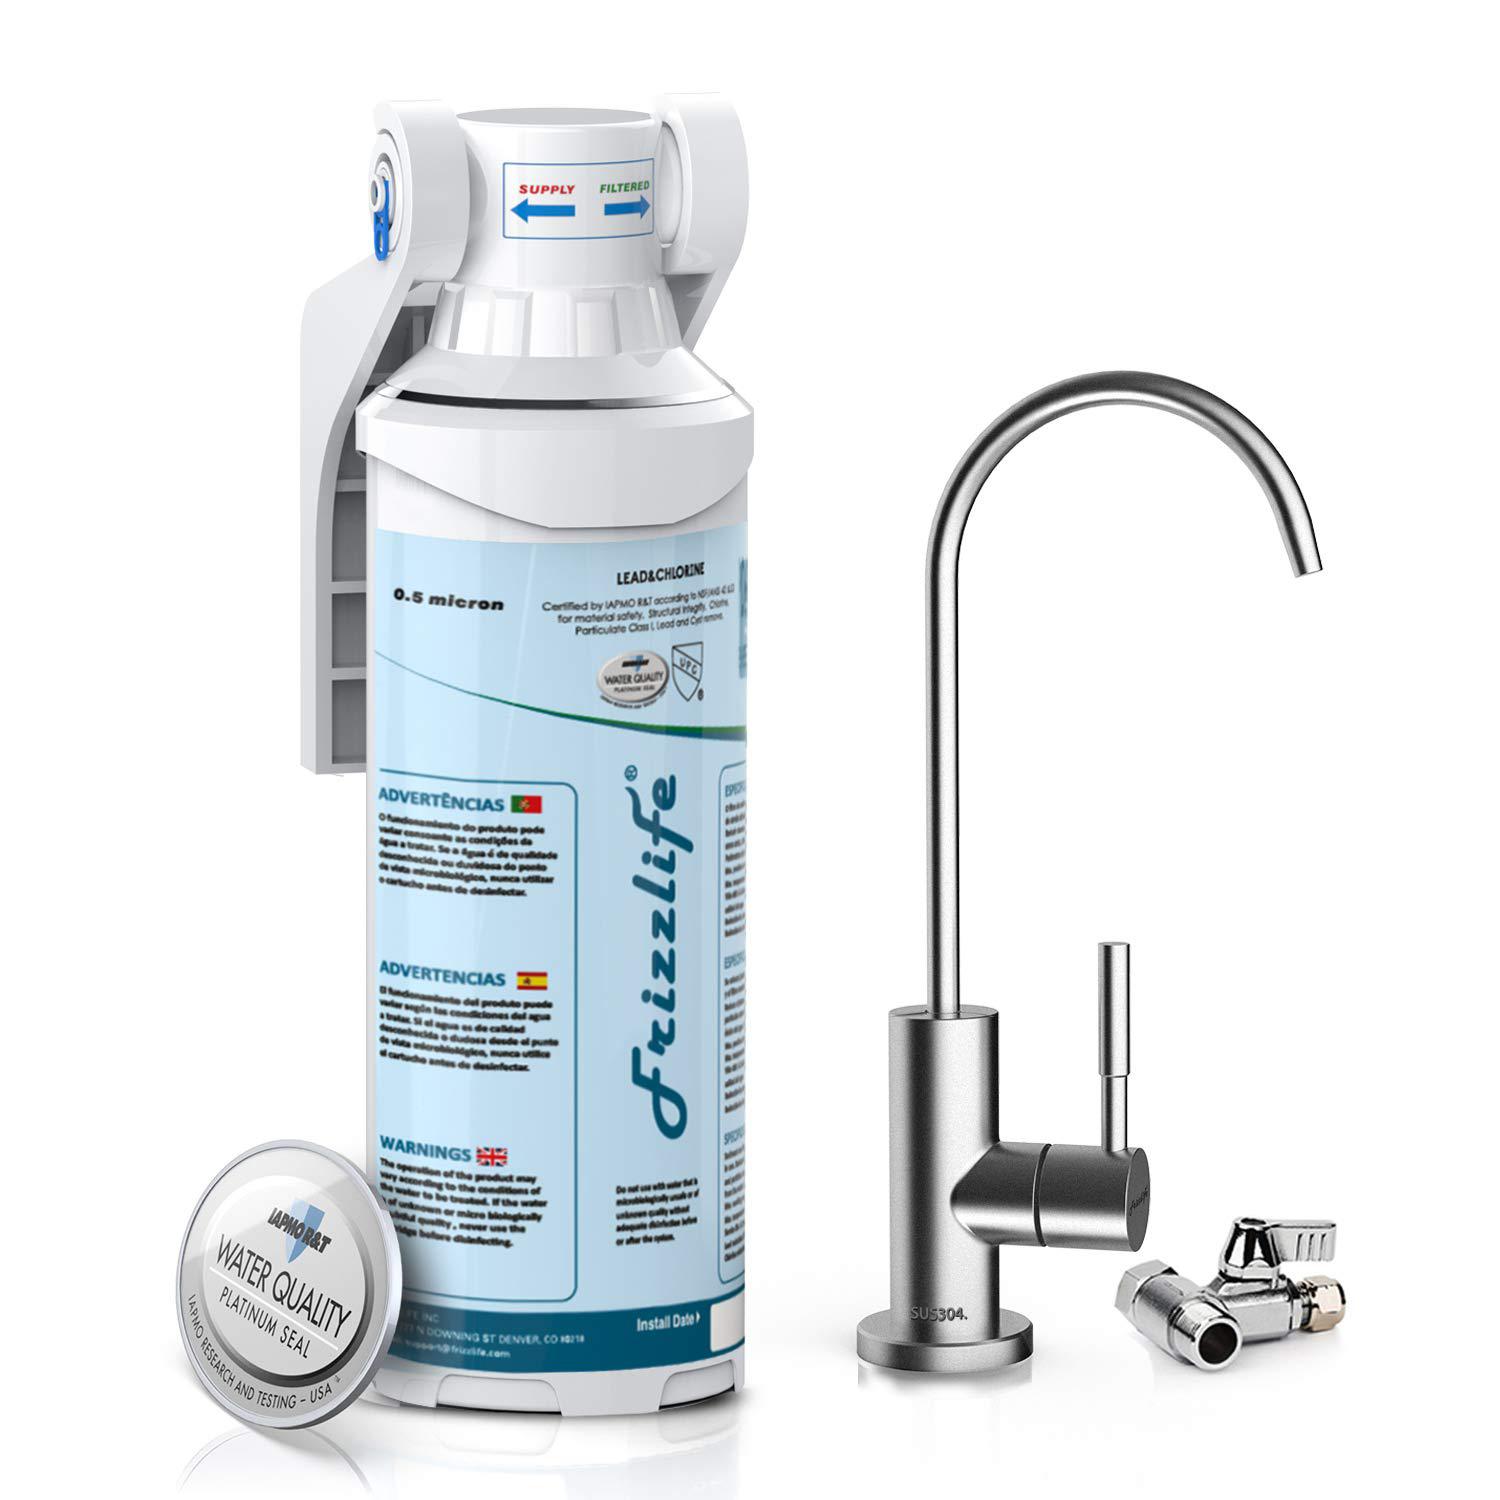 frizzlife under sink water filter-nsf/ansi 53&42 certified drinking water filtration system-0.5 micron removes lead, chlorine